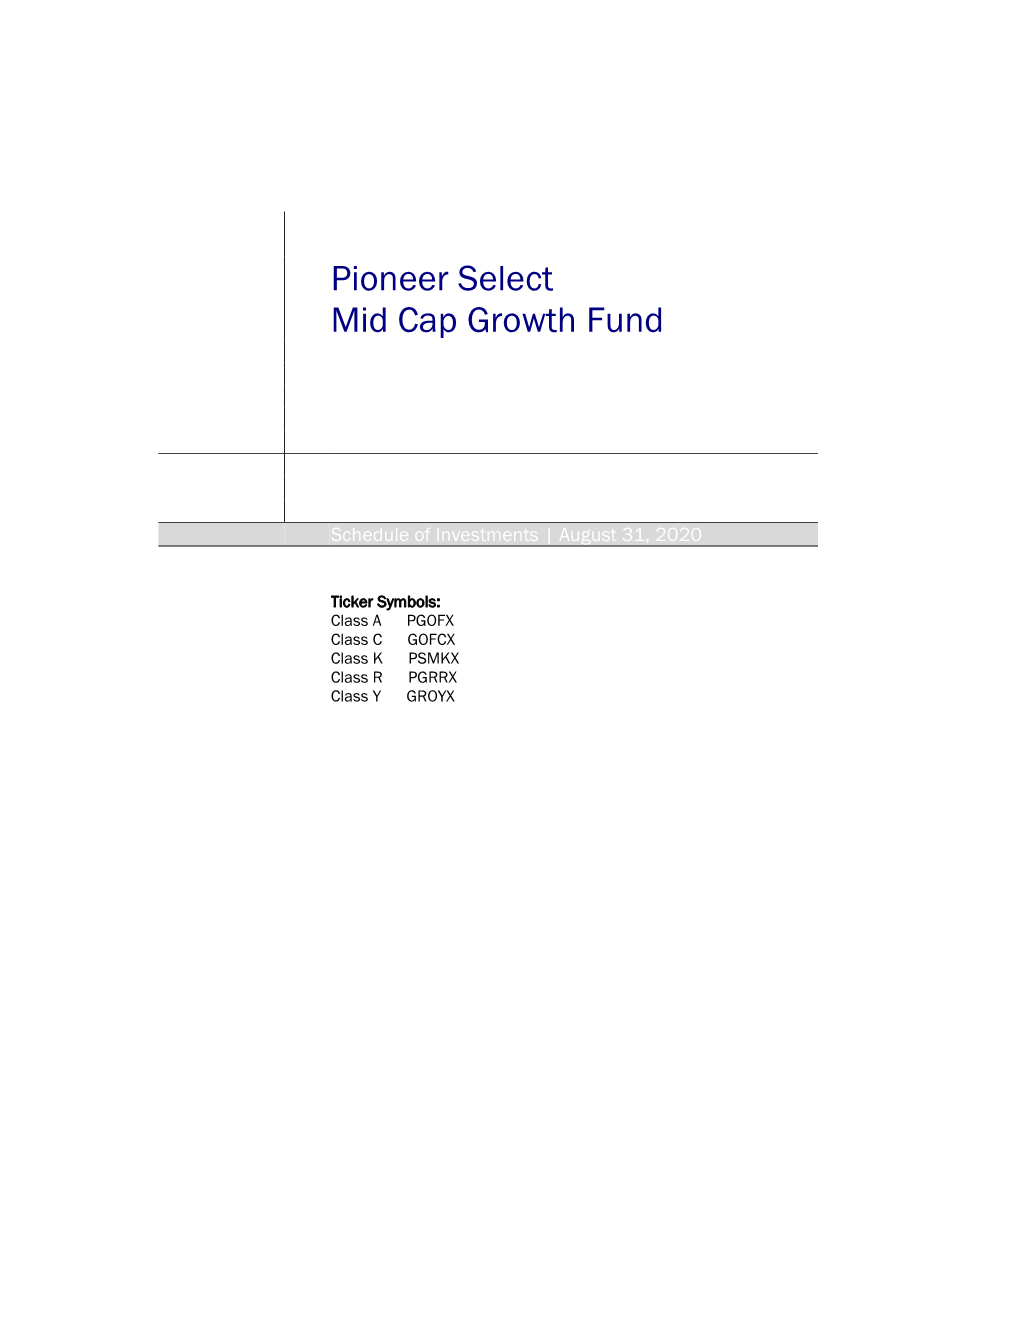 Pioneer Select Mid Cap Growth Fund